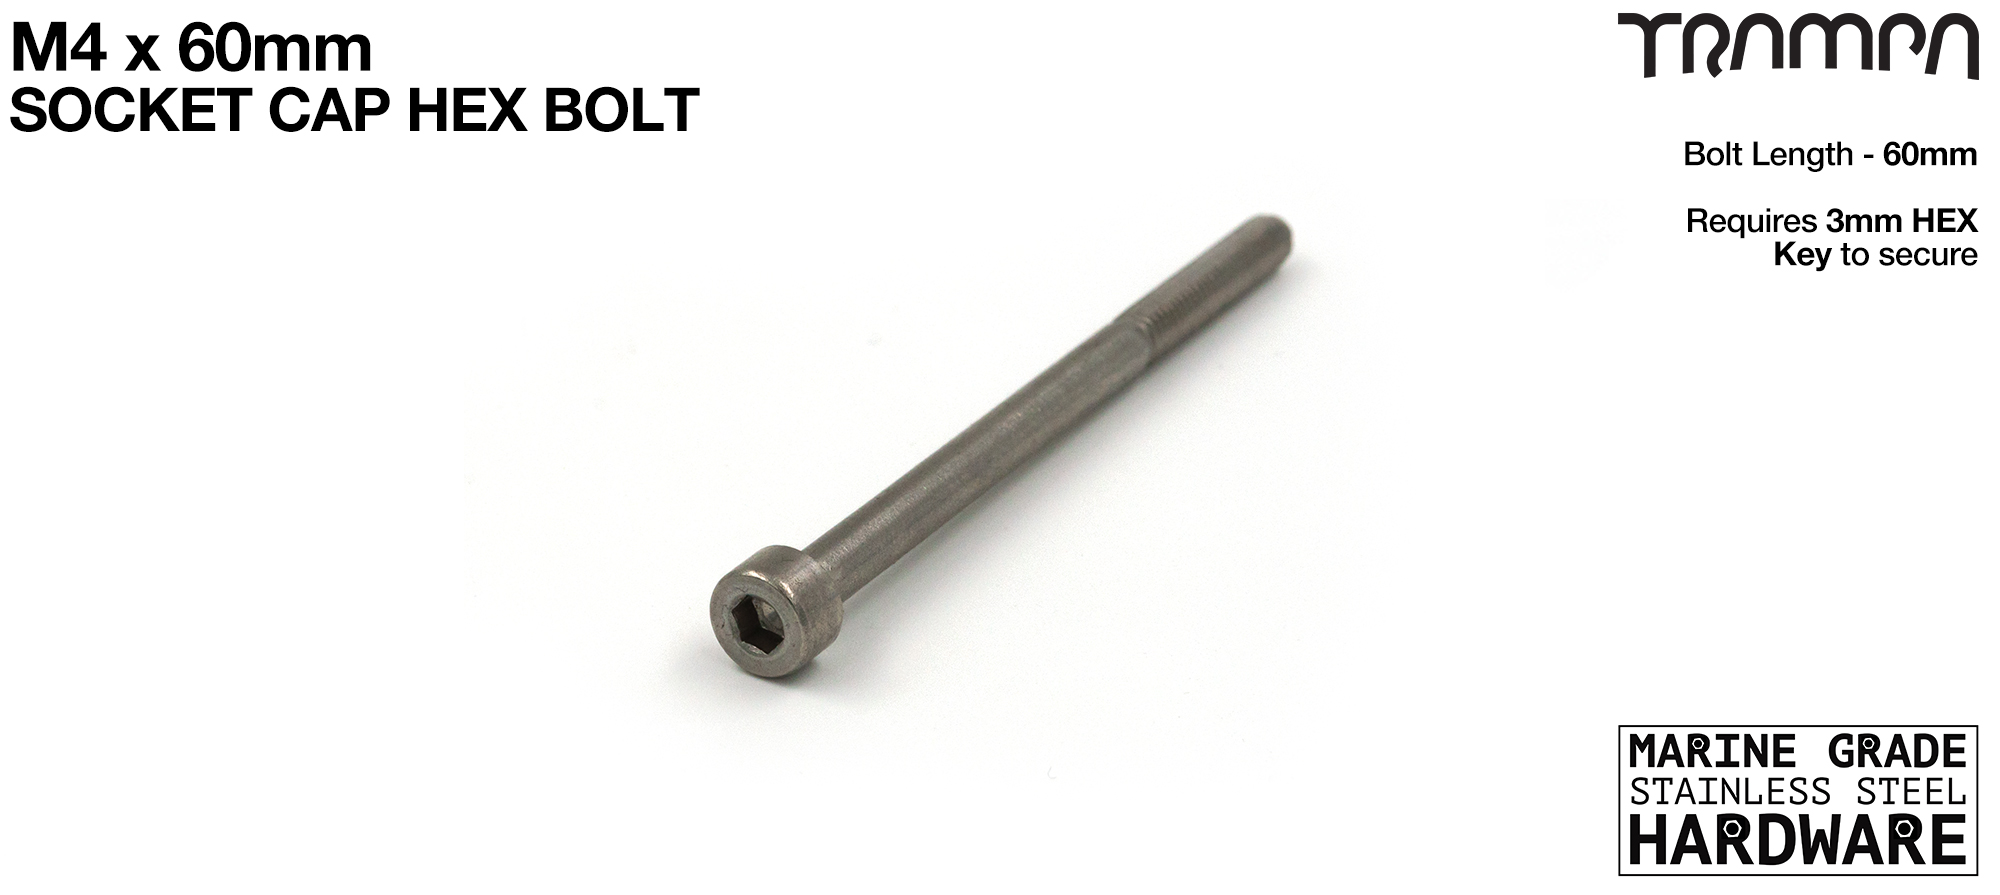 M4 x 60mm Socket Capped Allen-Key Bolt - Marine Grade Stainless steel Extends the connection from Spur Gear Drive Setup